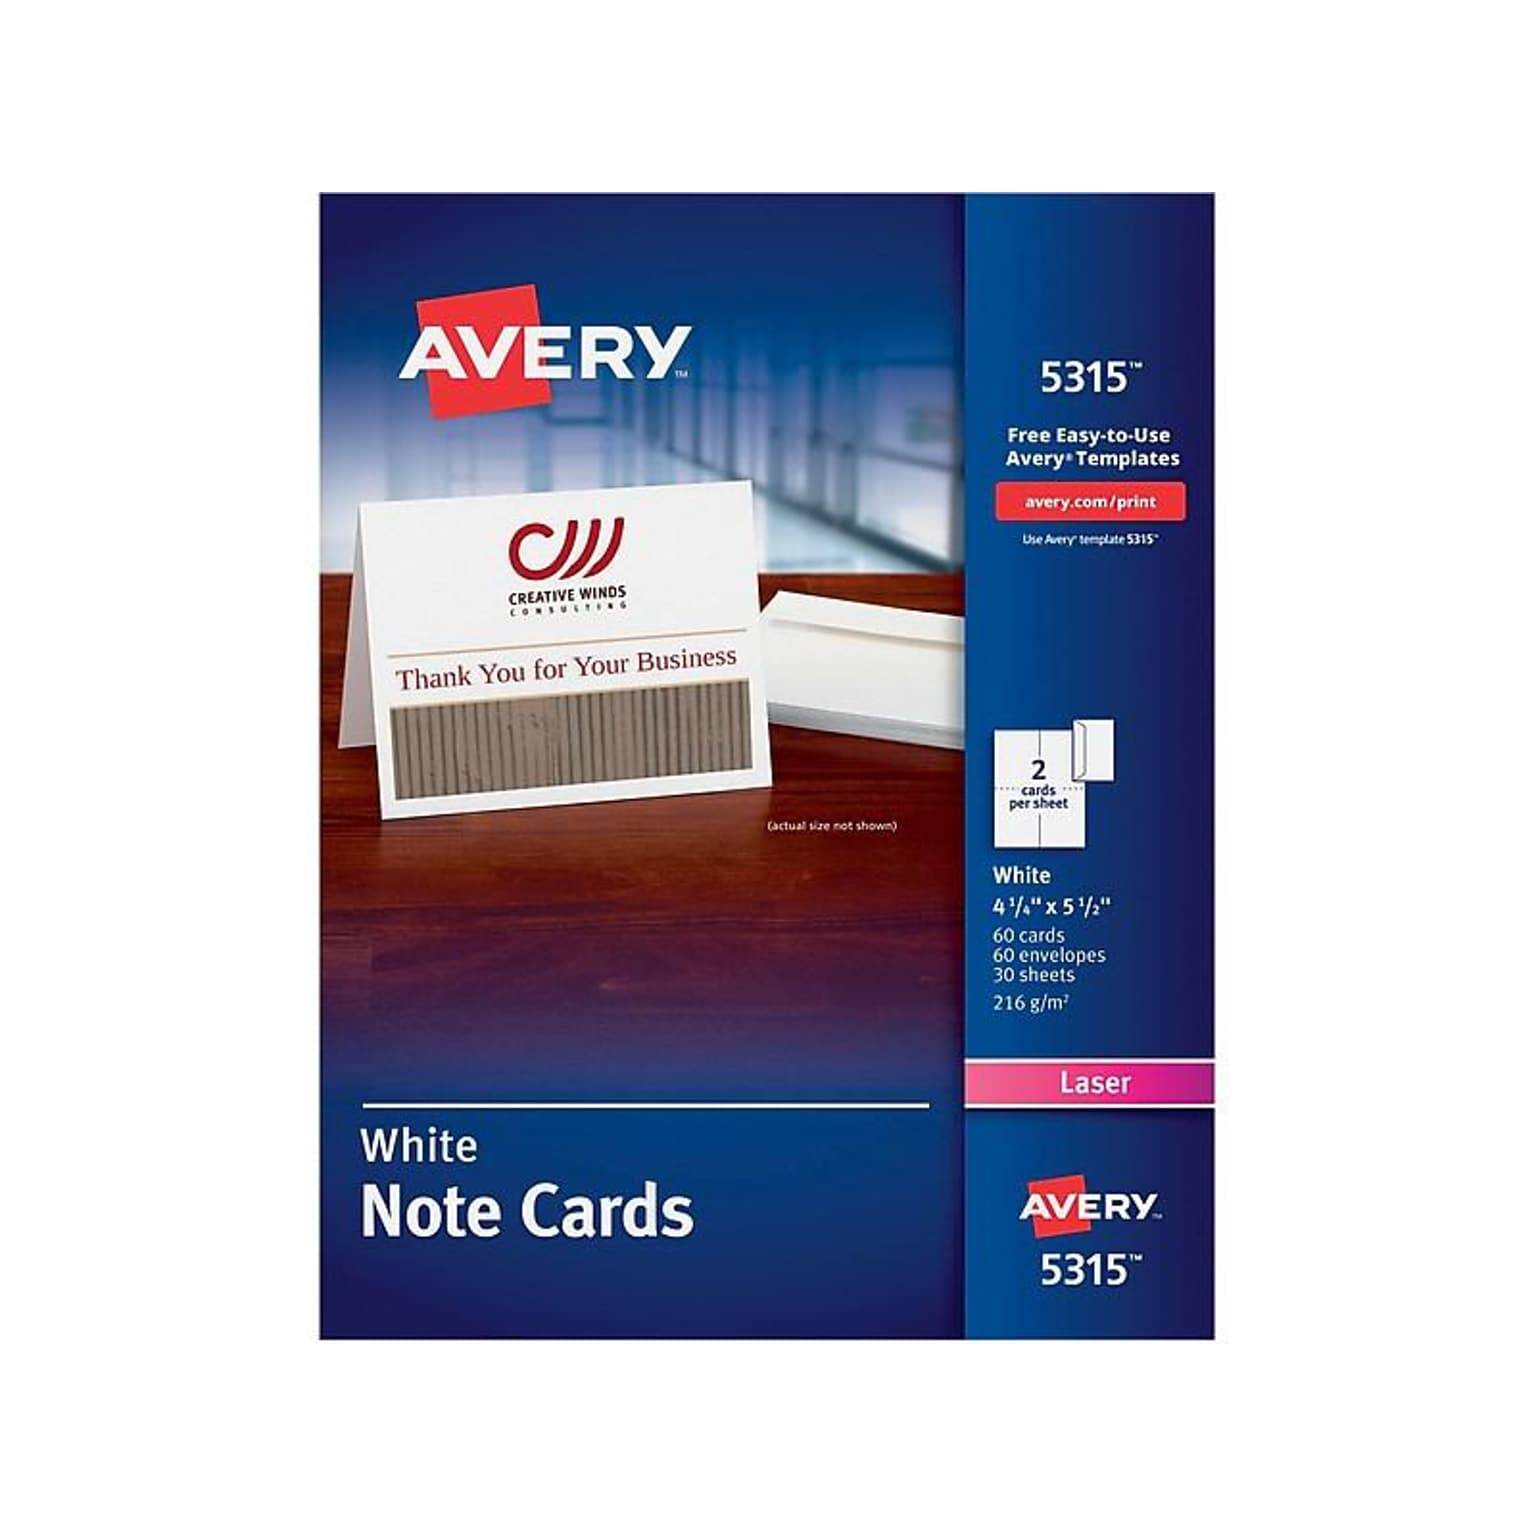 Avery Uncoated Notecards, 5.5 x 4.25, White, 60/Box (5315)